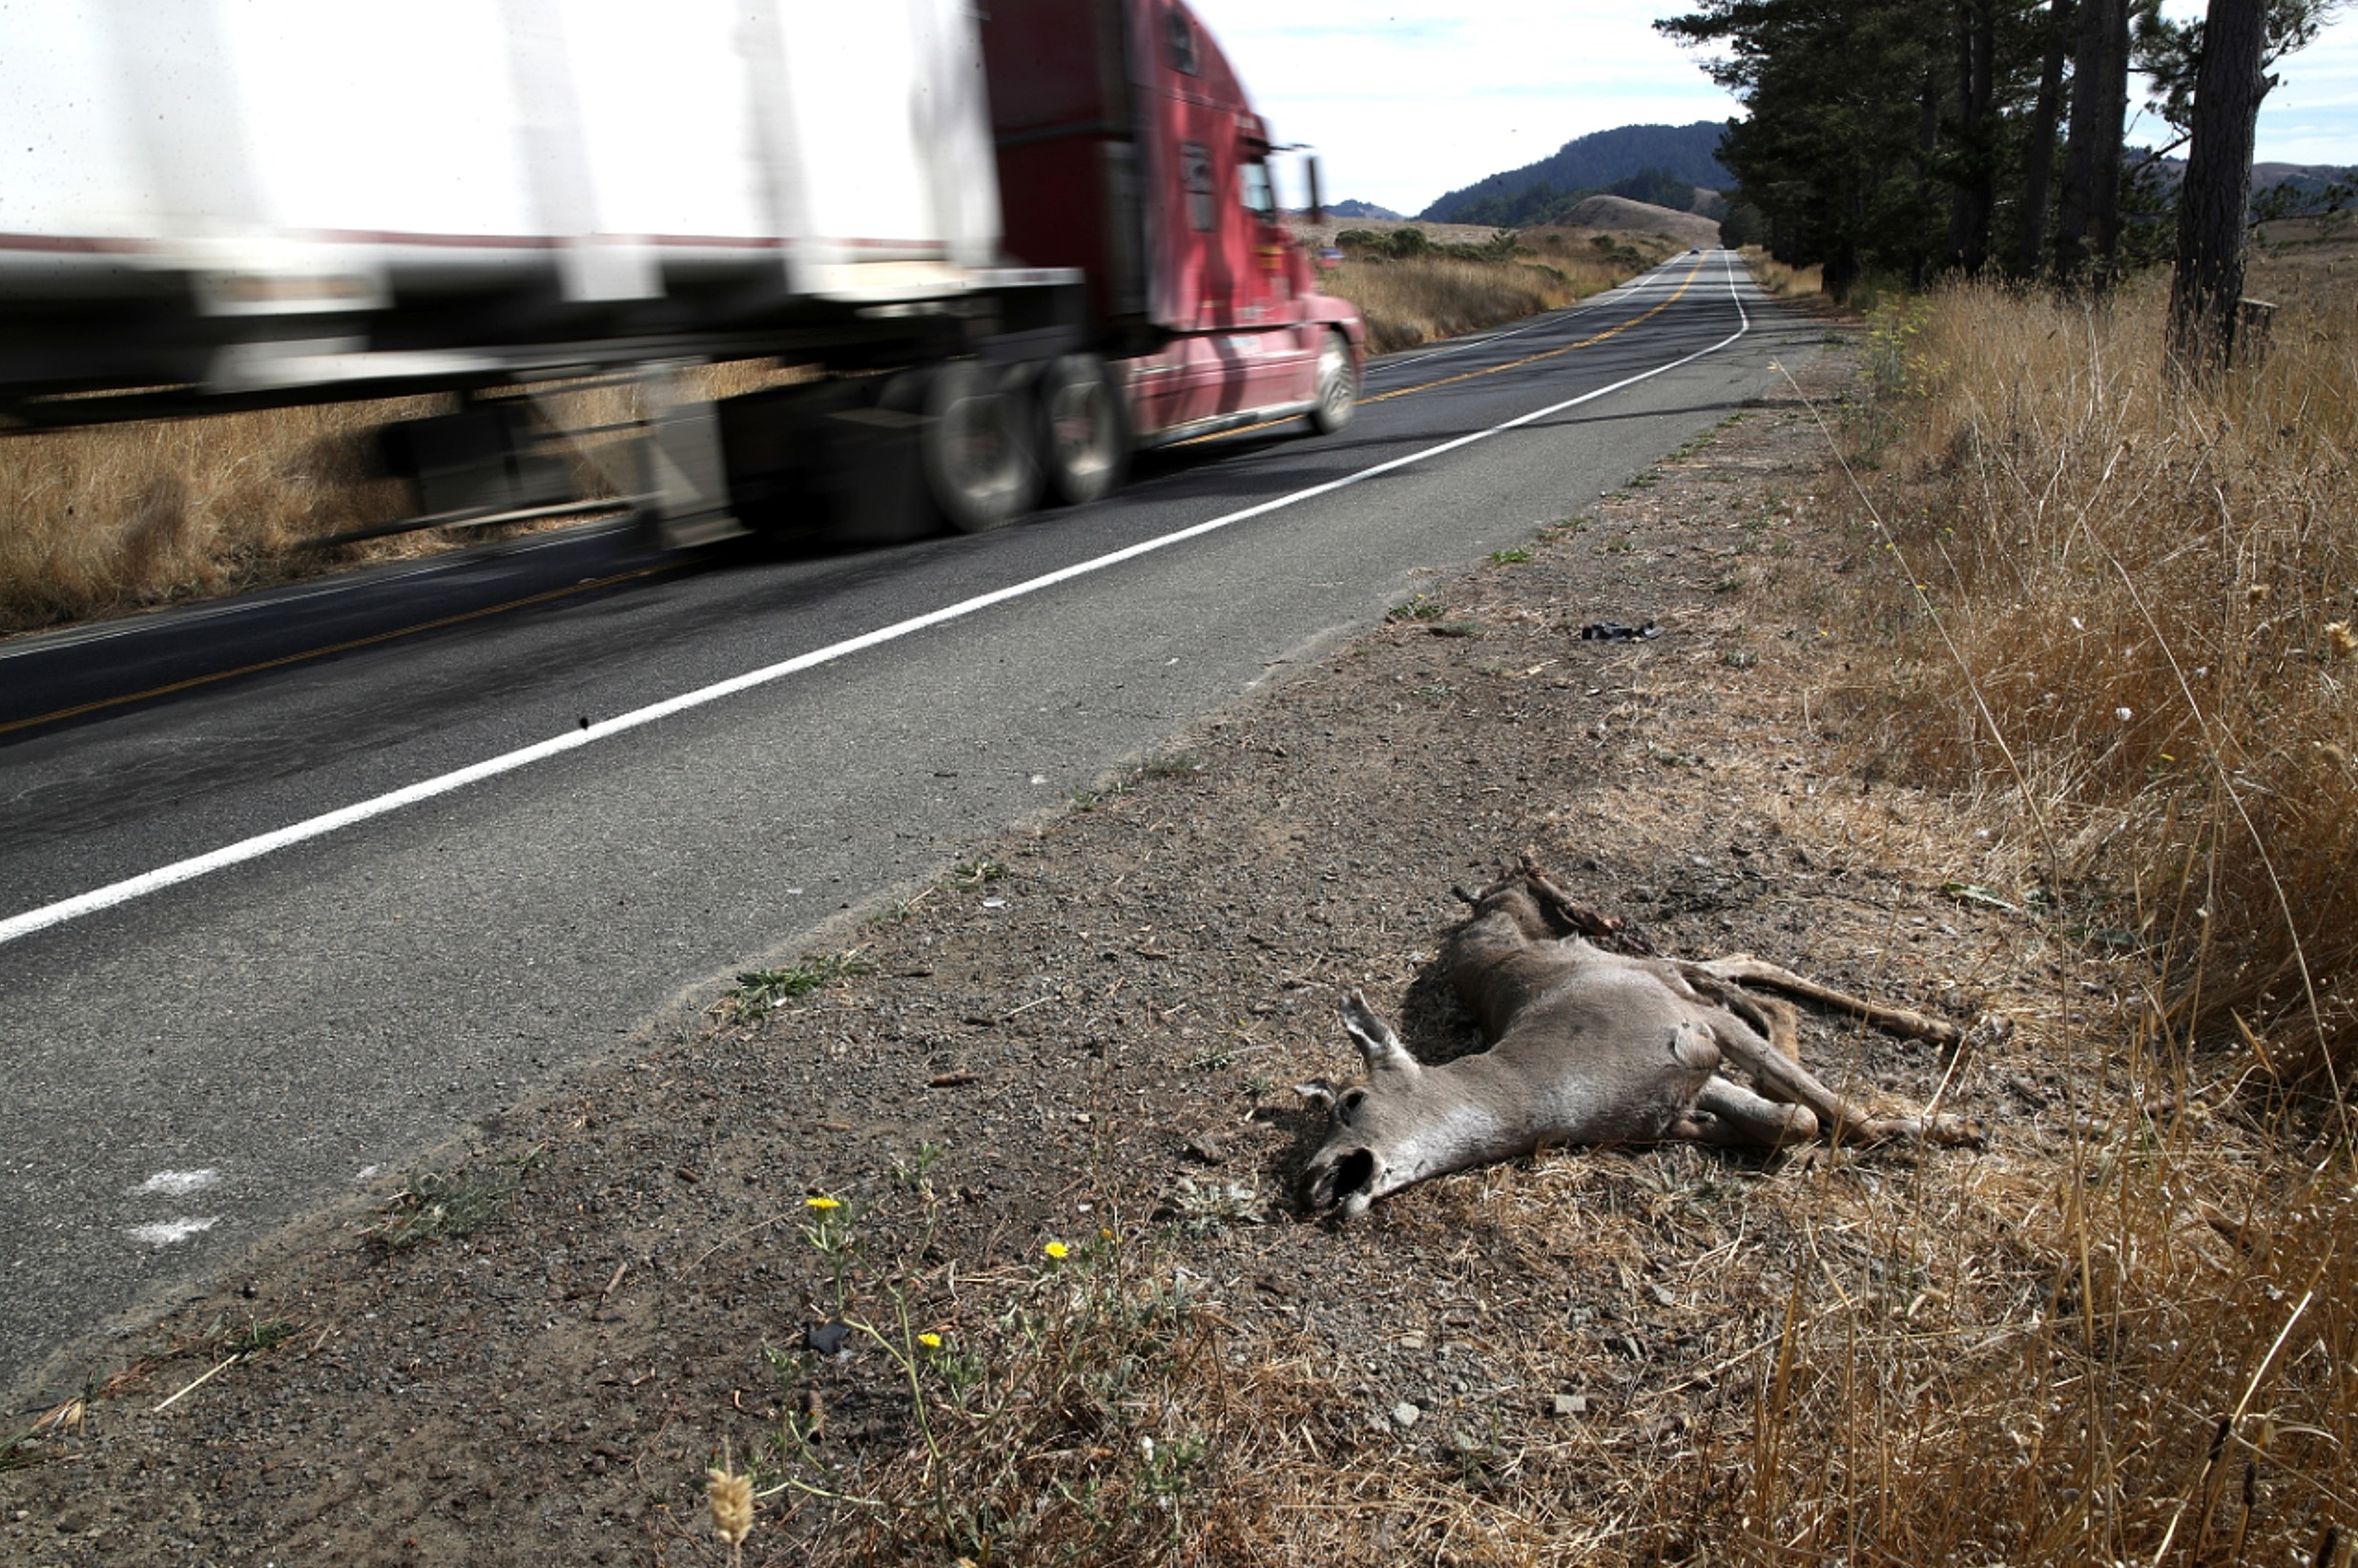 Roadkill: it's what's for dinner. Photo by Justin Sullivan/Getty Images